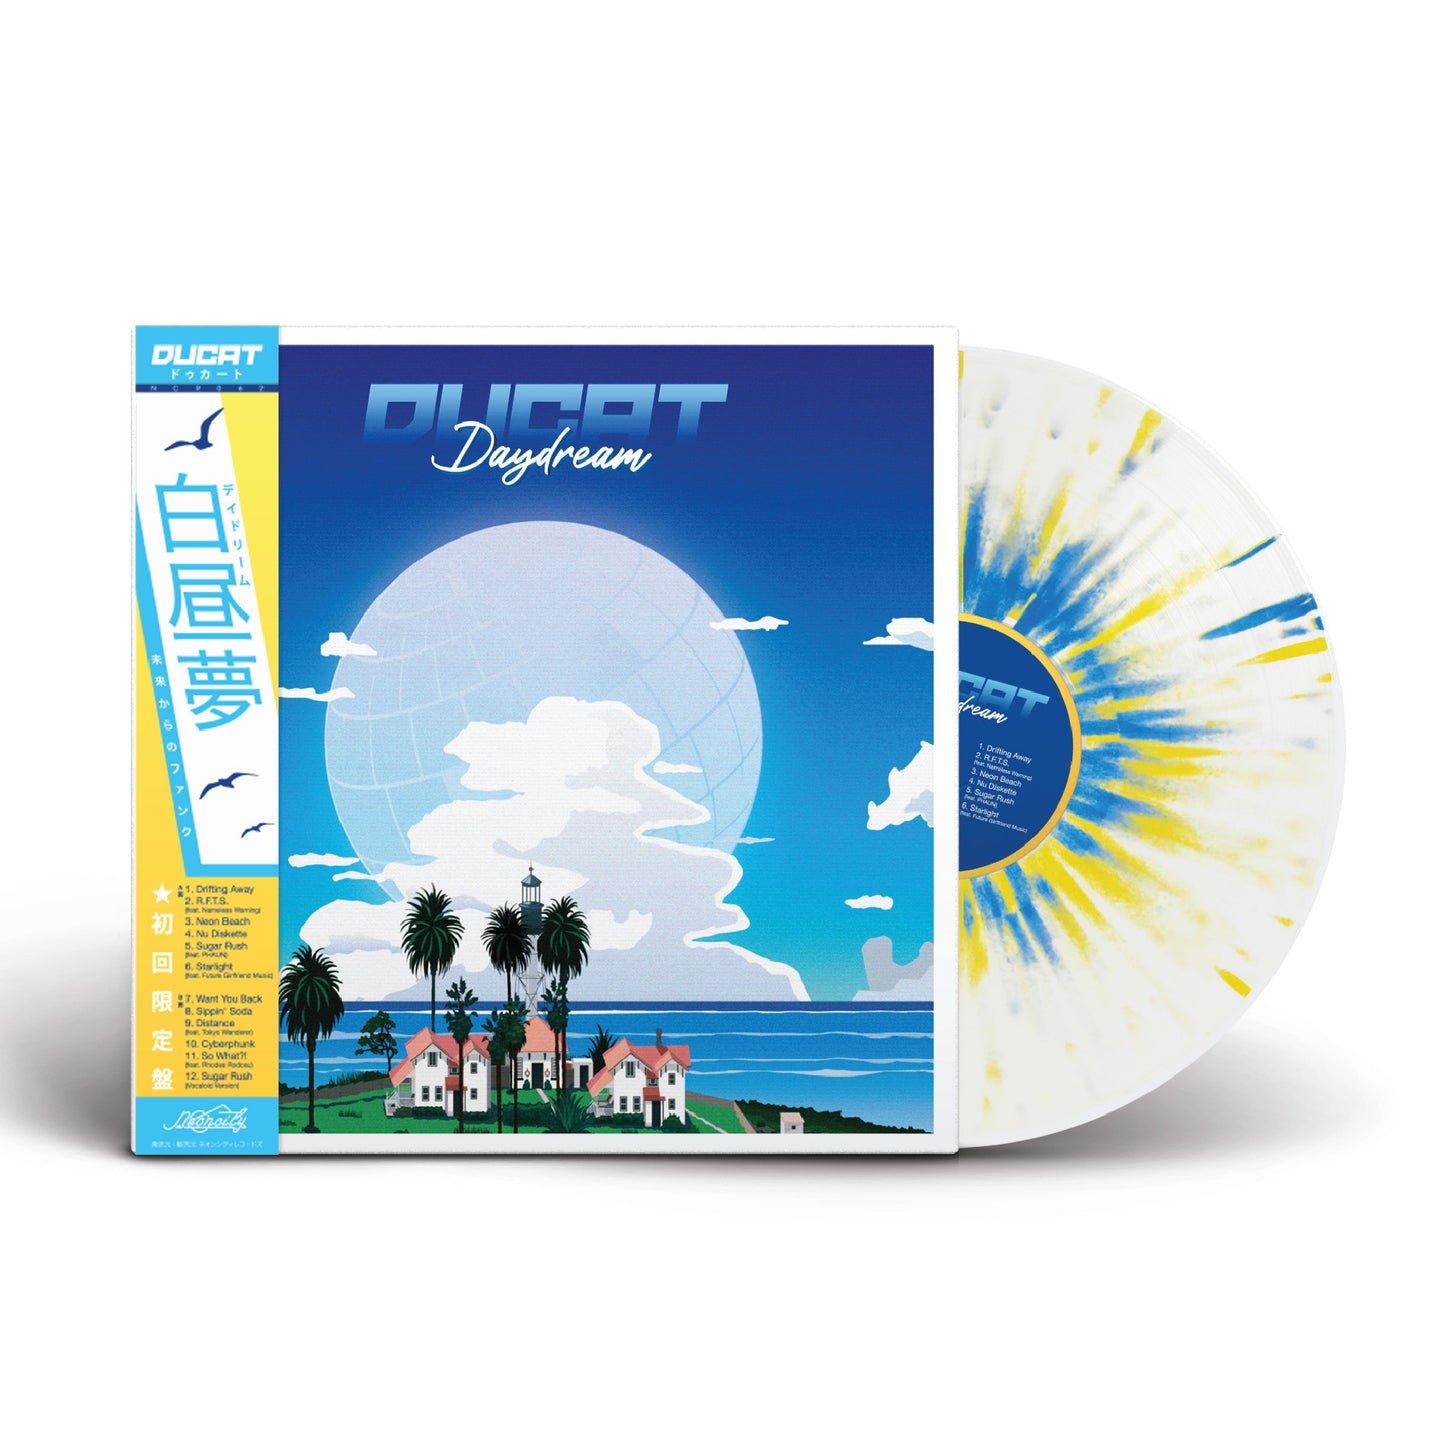 DUCAT  - 'Daydream' Limited Edition 12" Vinyl - Neoncity Records